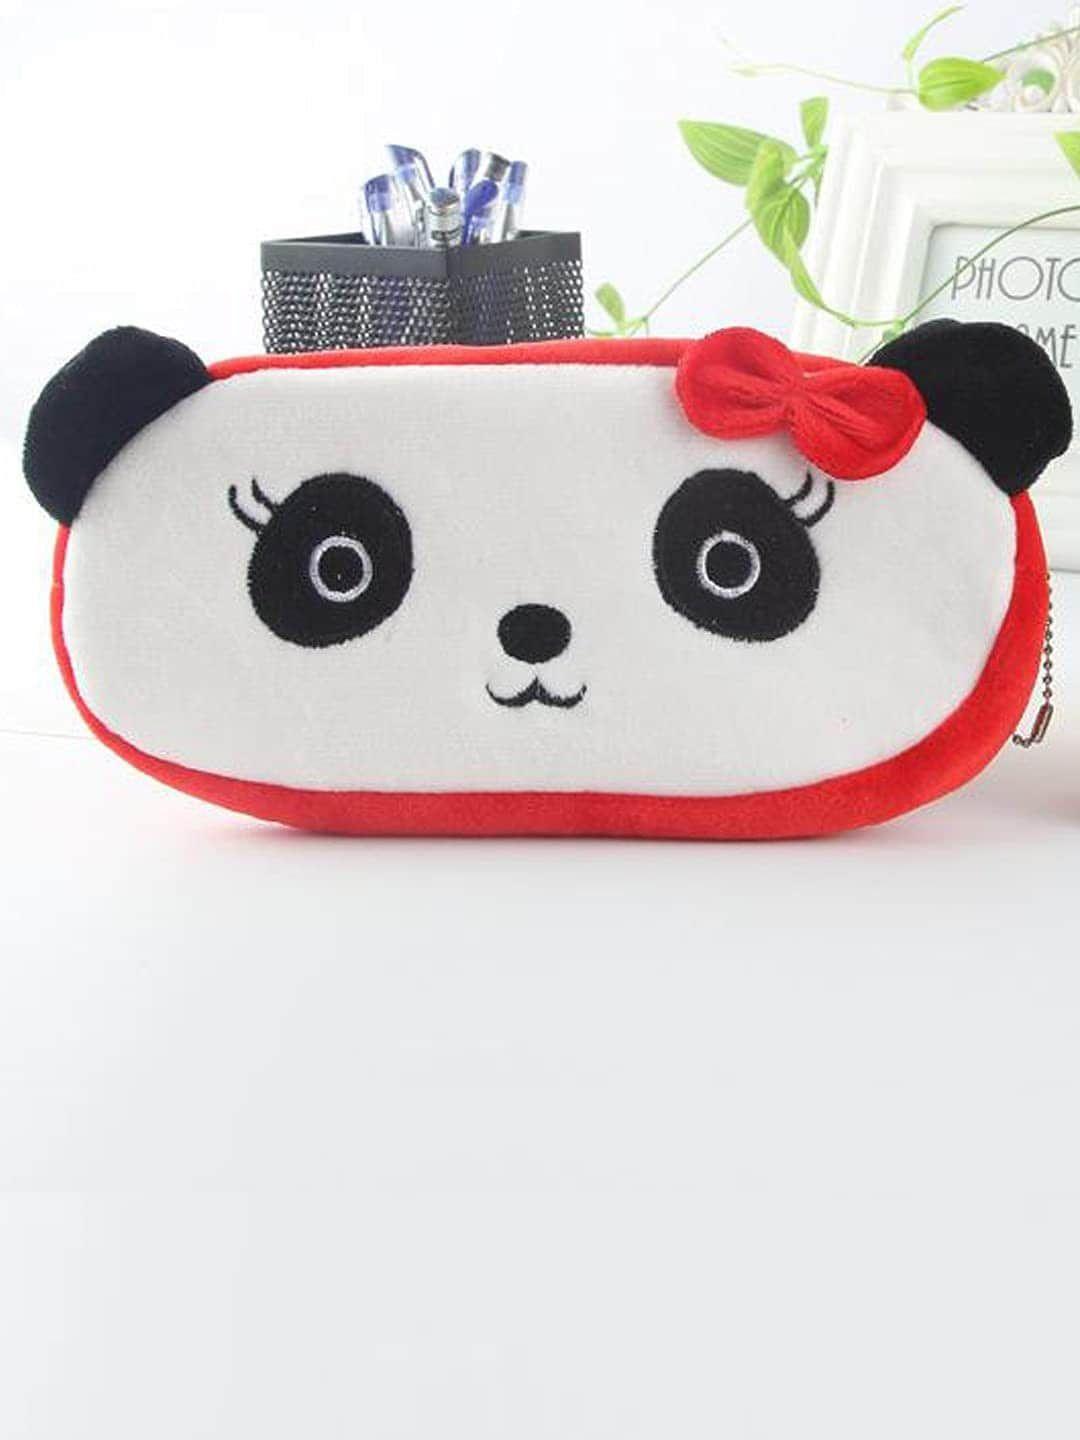 awestuffs red & white printed panda shaped travel pouch